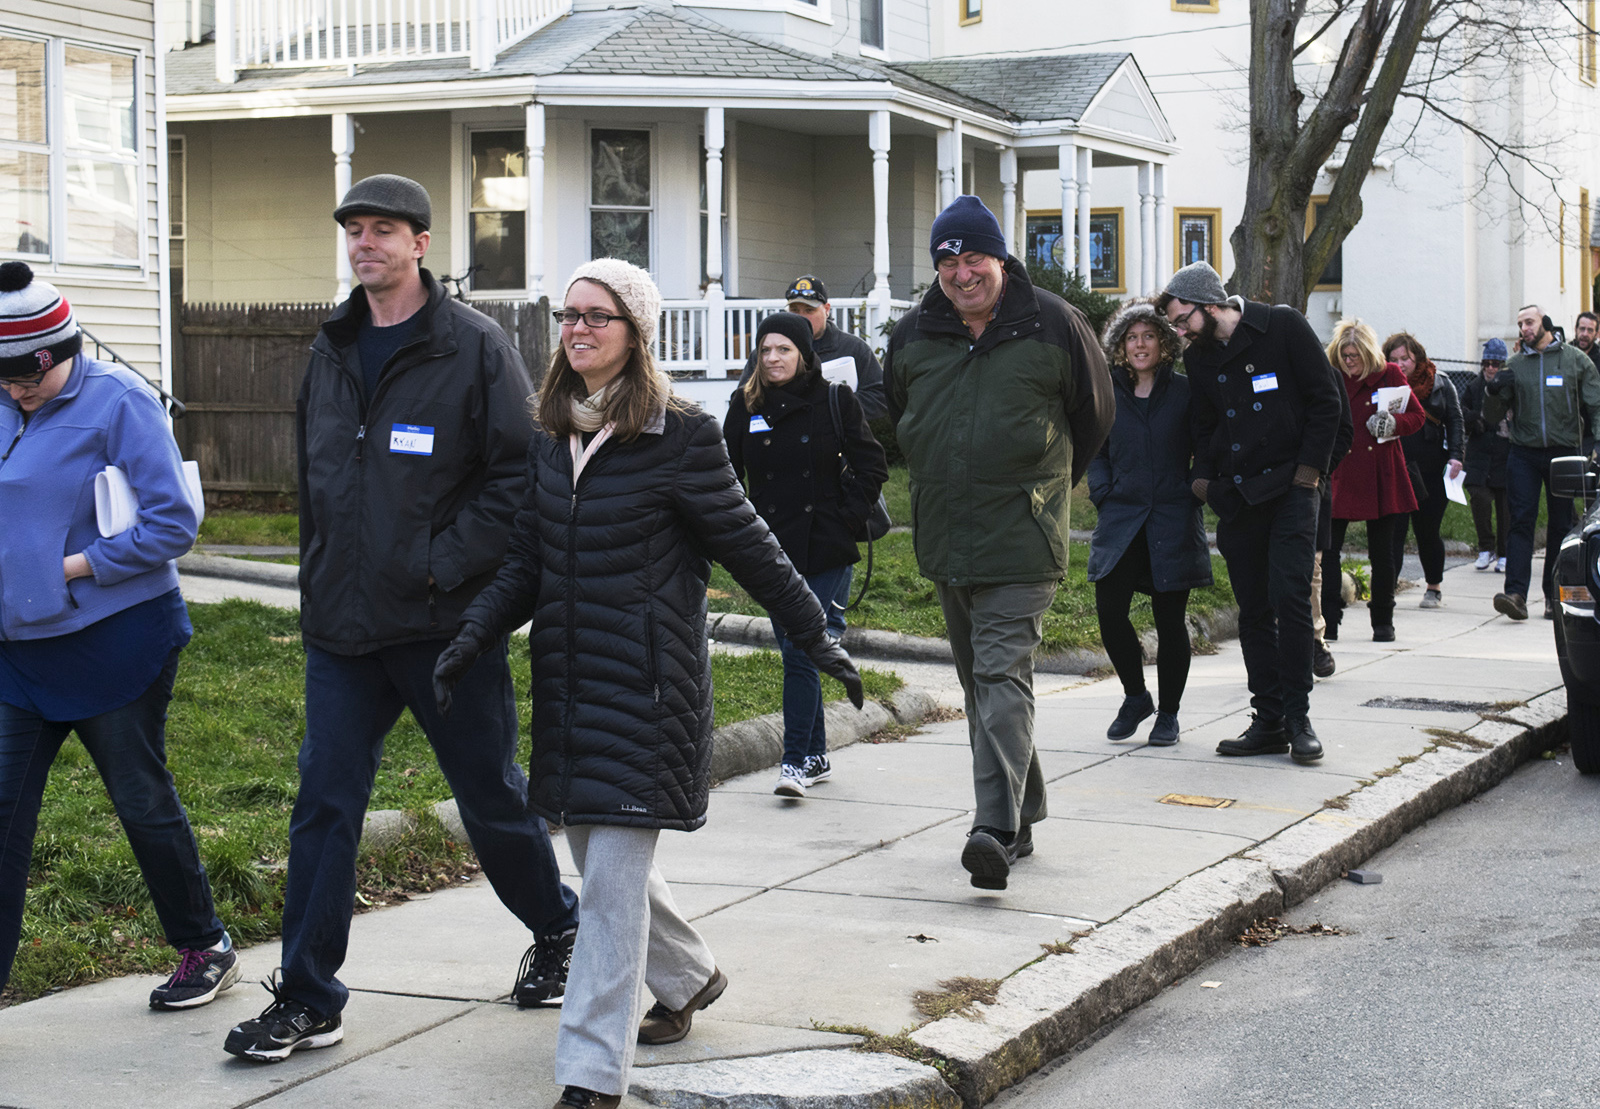 Boston residents participate in a walking tour of Allston Saturday afternoon for Imagine Boston 2030 Week, an engagement effort by Boston Mayor Martin Walsh to share plans for the city. PHOTO BY ASHLEY GRIFFIN/ DAILY FREE PRESS STAFF